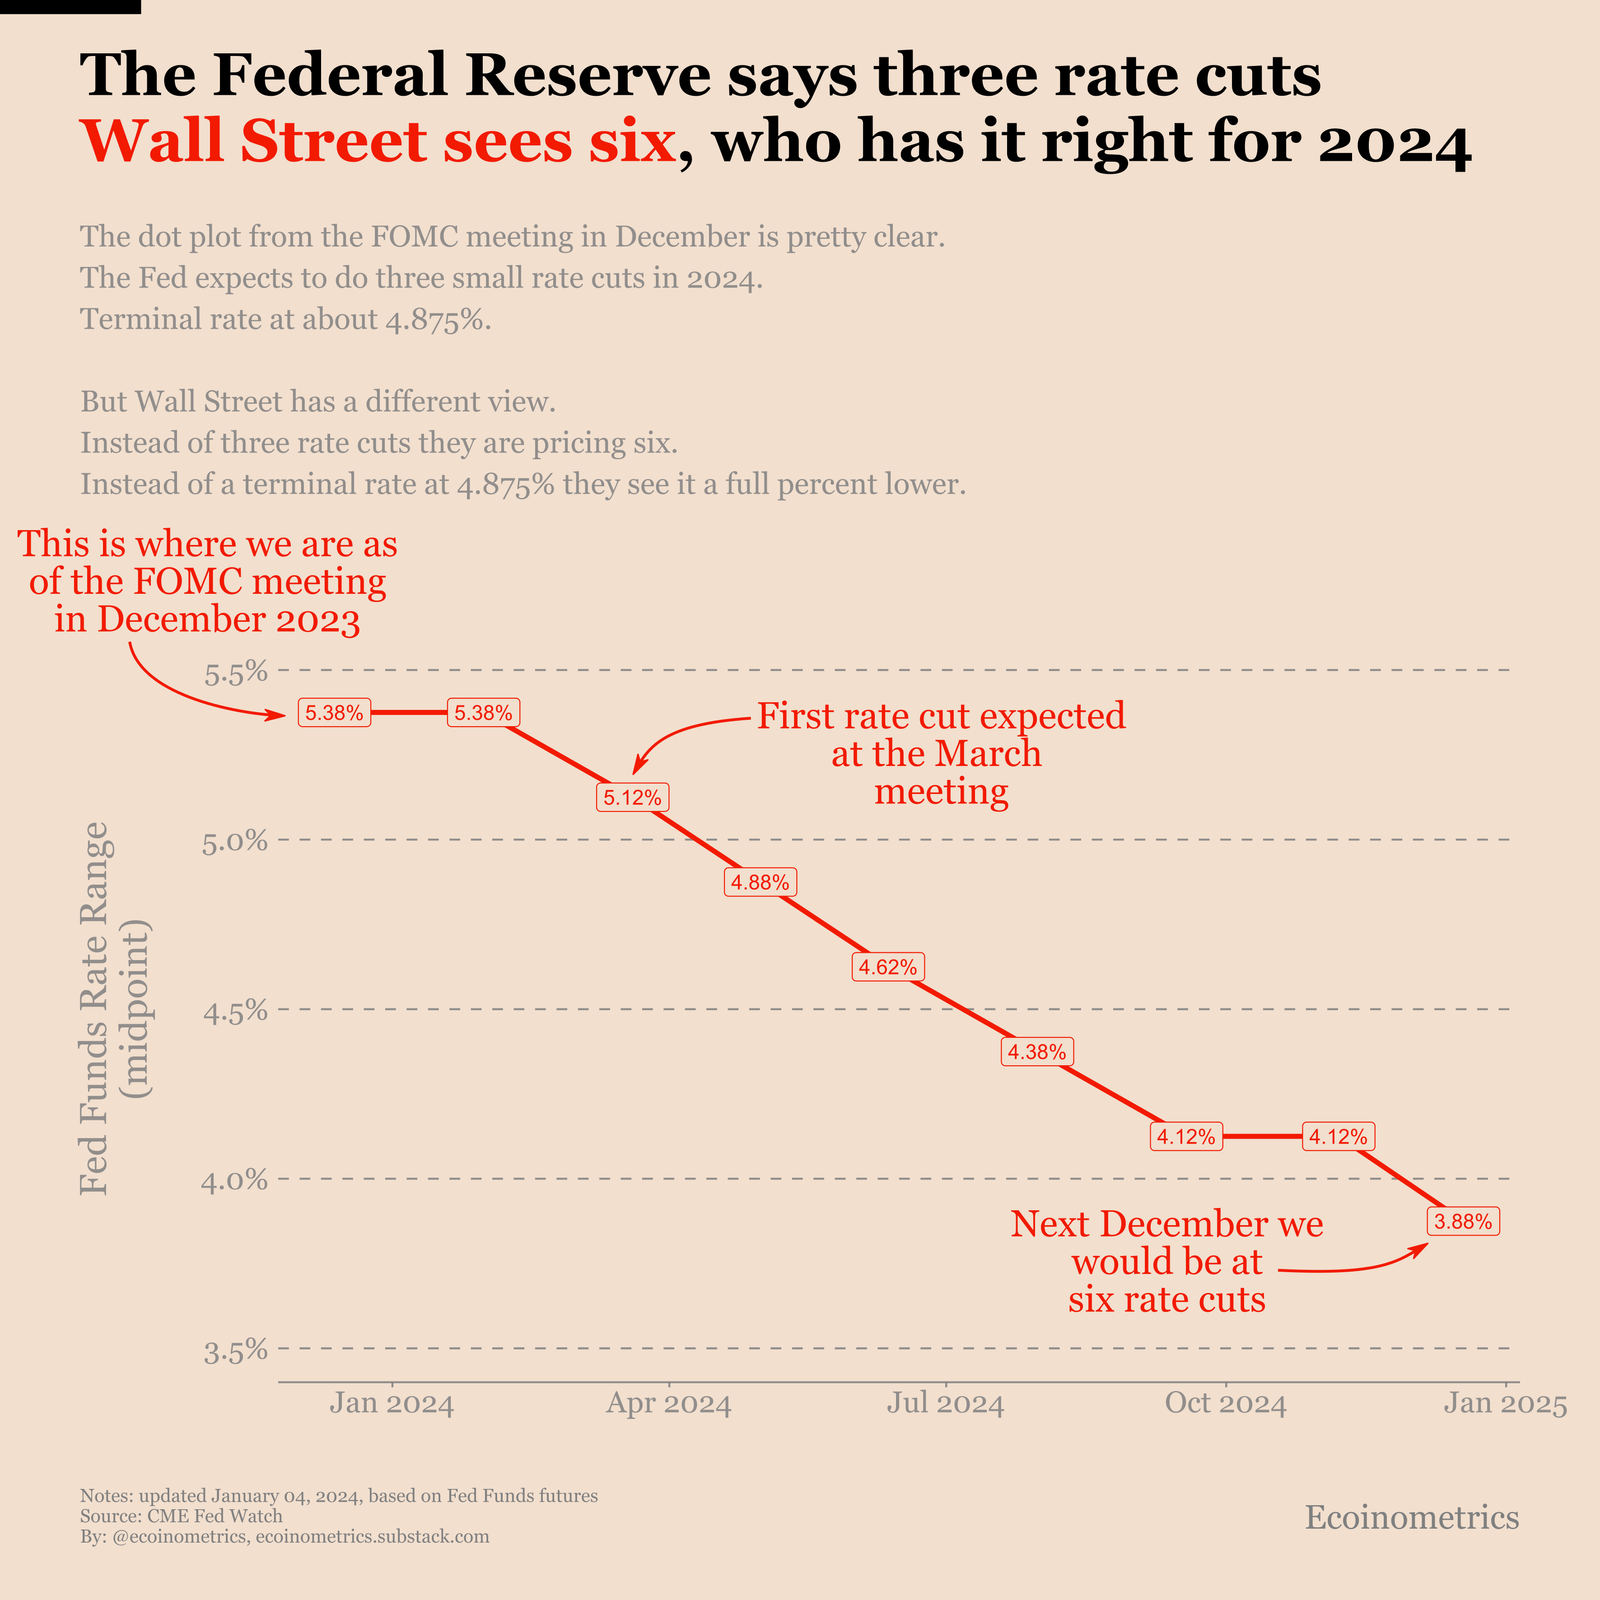 How many rate cuts in 2024 three according to the Federal Reserve, six